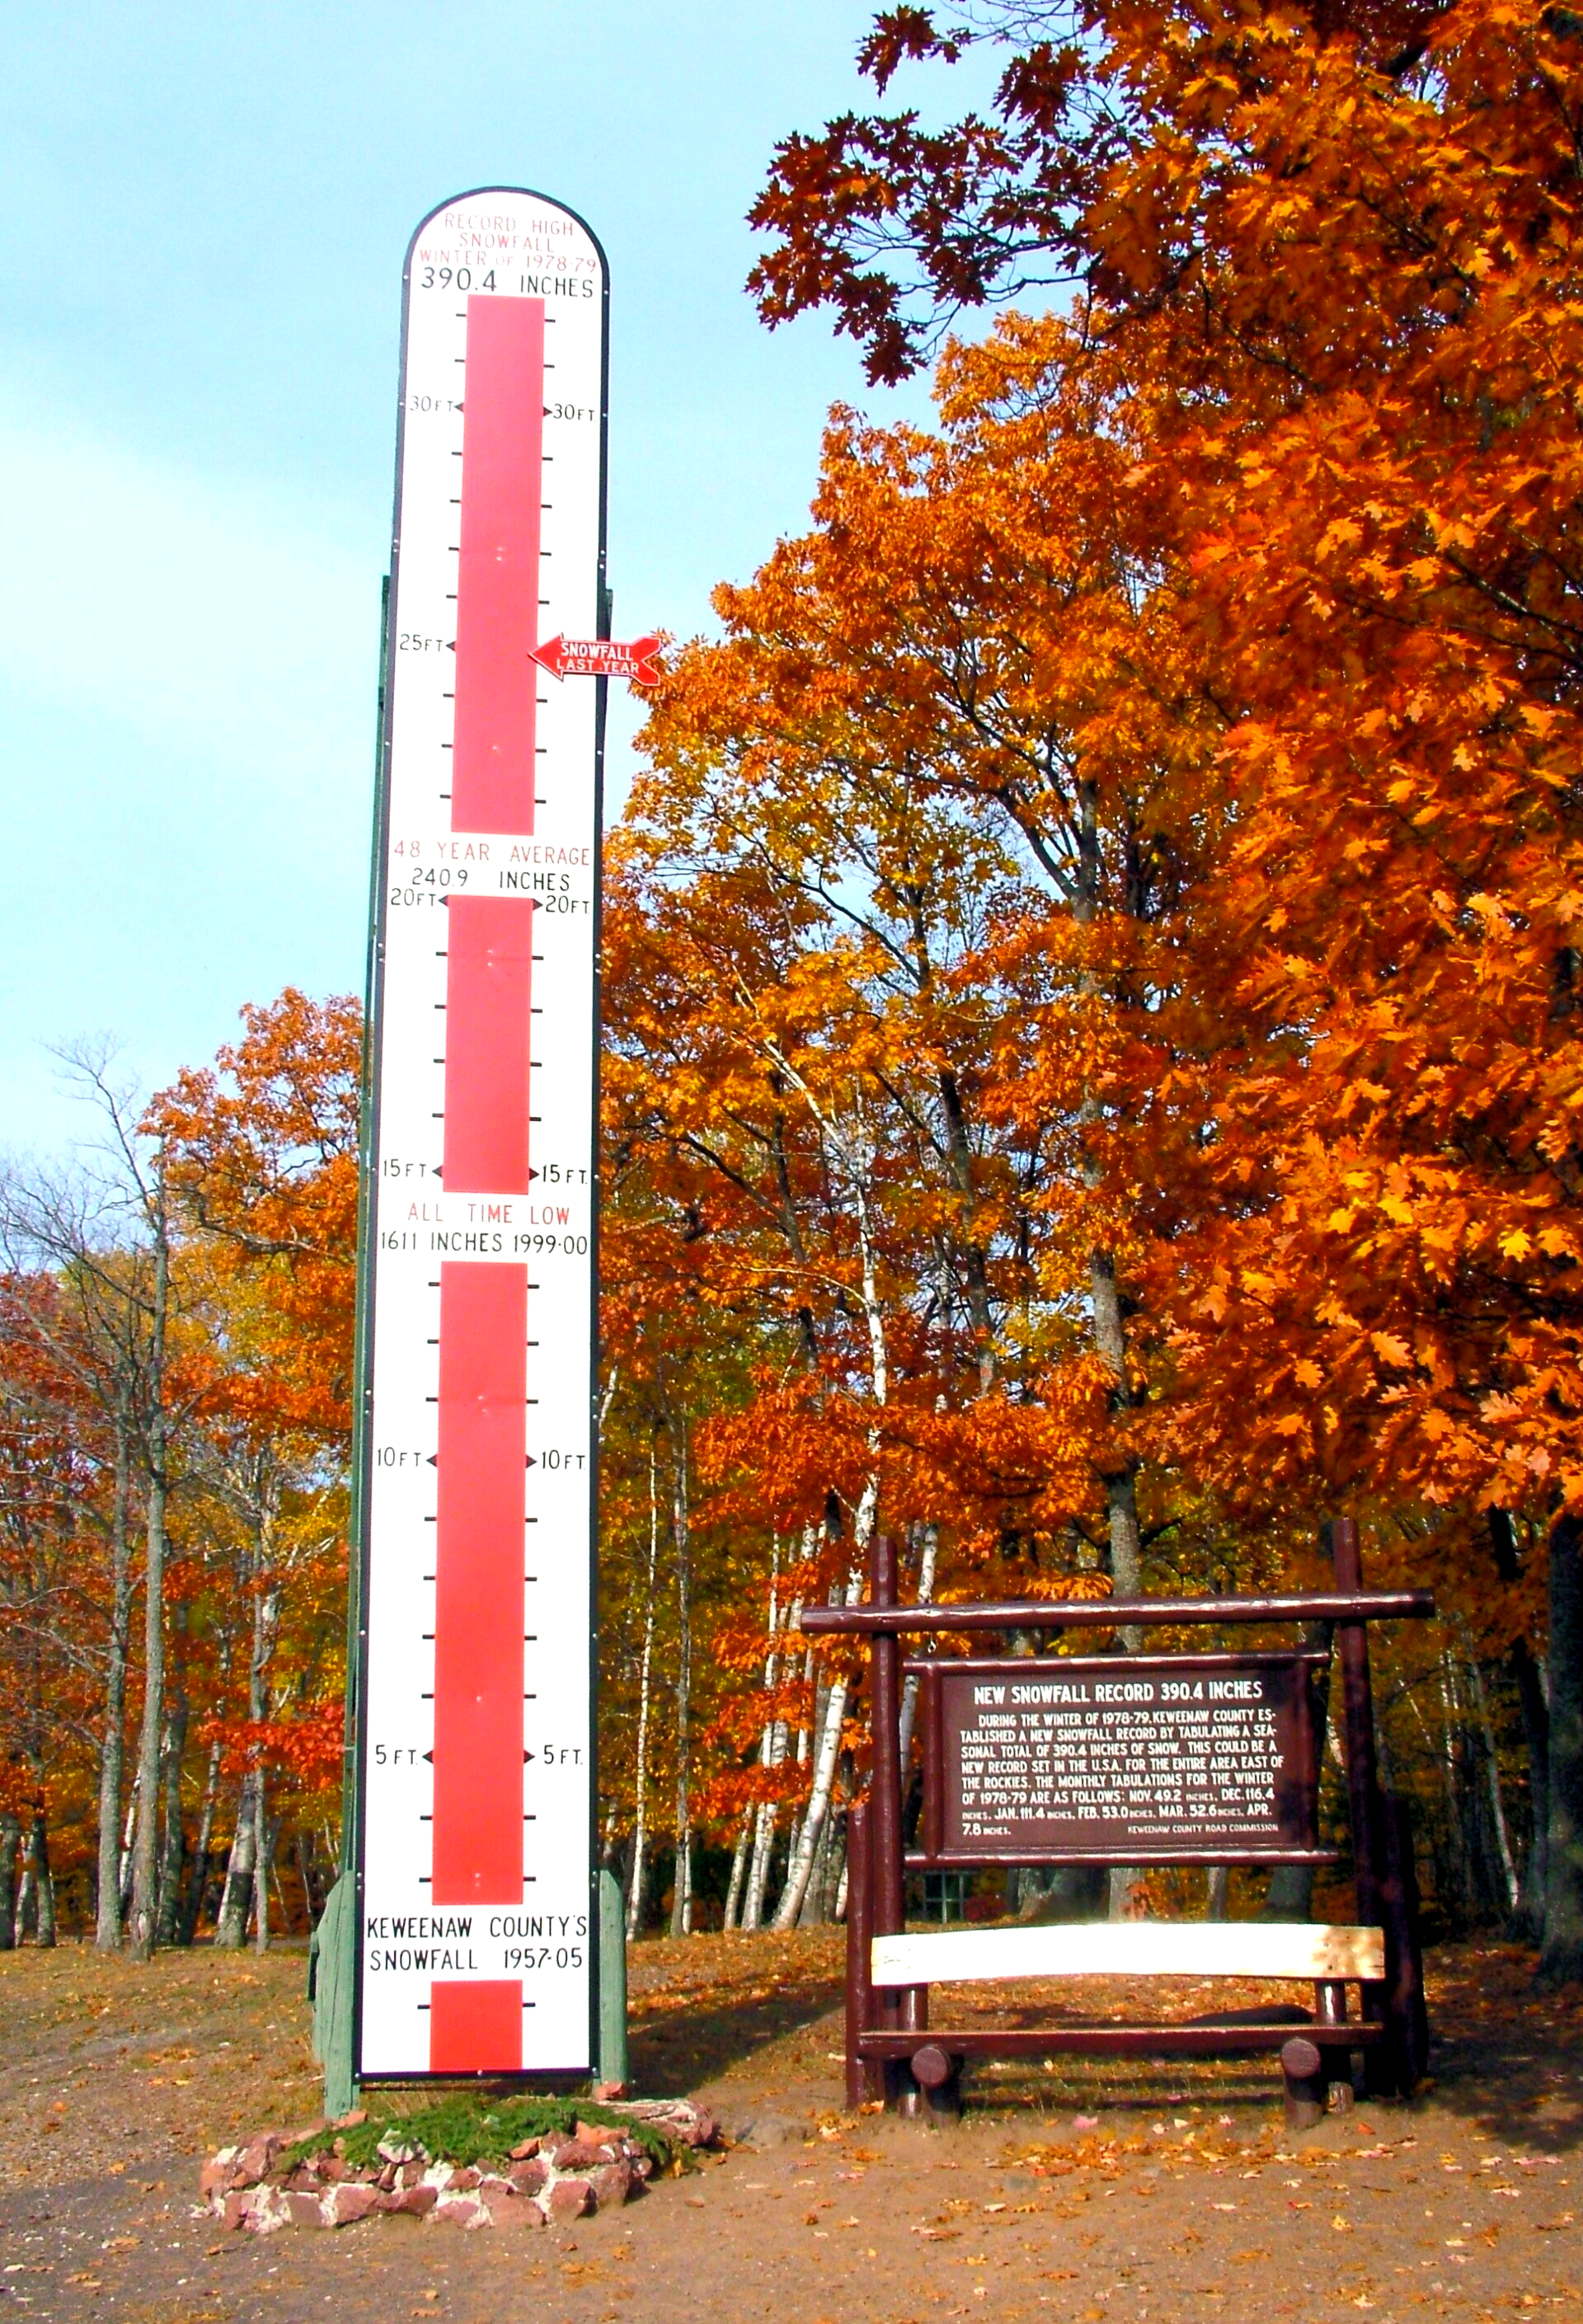 World's Largest Snow Thermometer: world record in Mohawk, Michigan